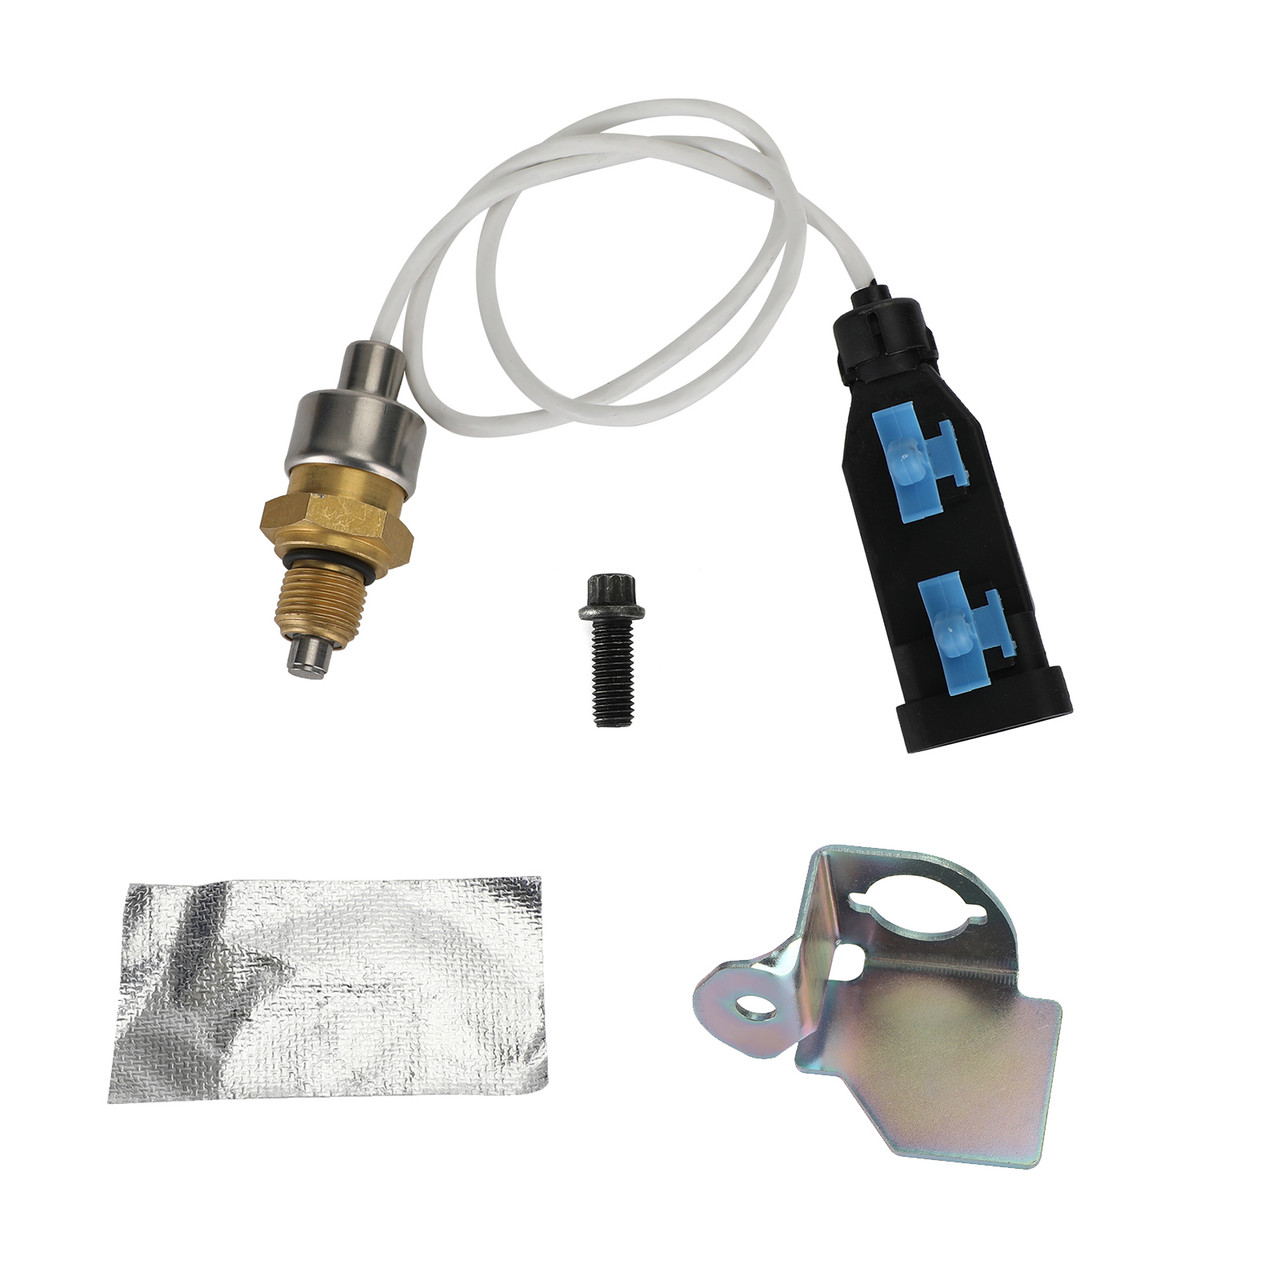 2005-2010 Ford E-Series Turbo VGT Tune-Up Kit-Vane Position Sensor 12635324 & VGT Solenoid 3C3Z6F089AA 6.0L Powerstroke engine